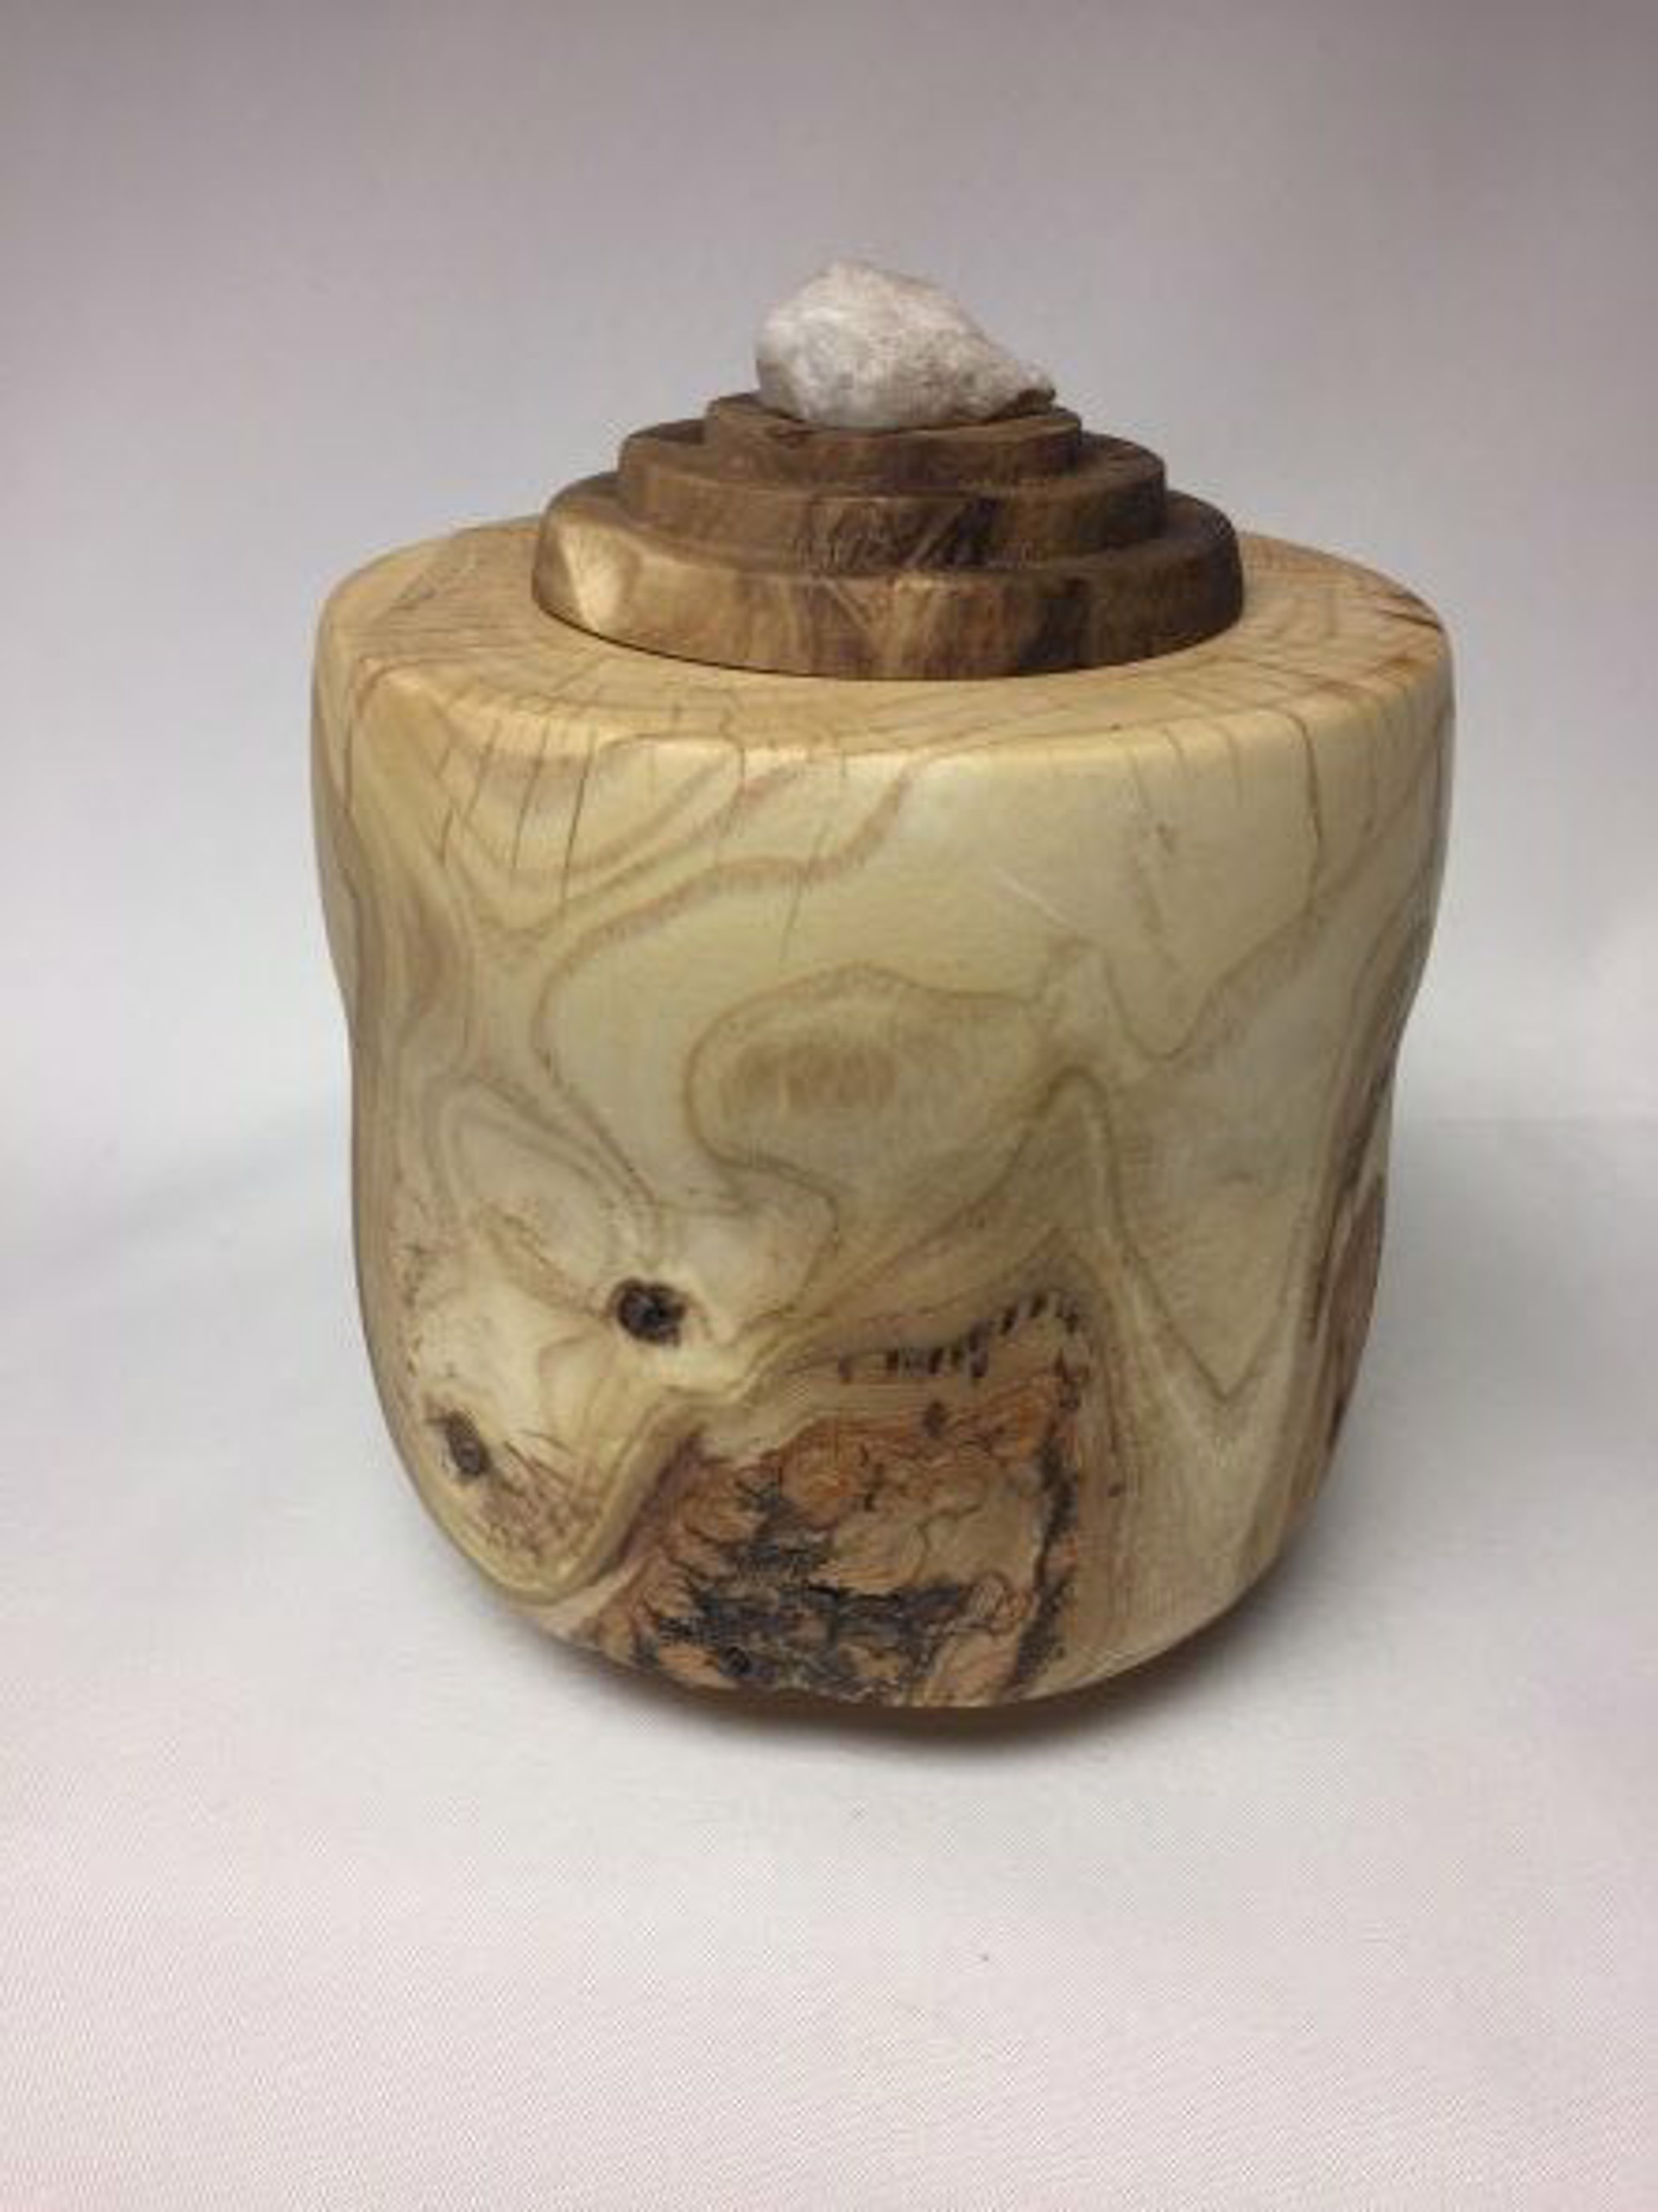 Turned Wood Jar W/Lid 21-61 by Rick Squires